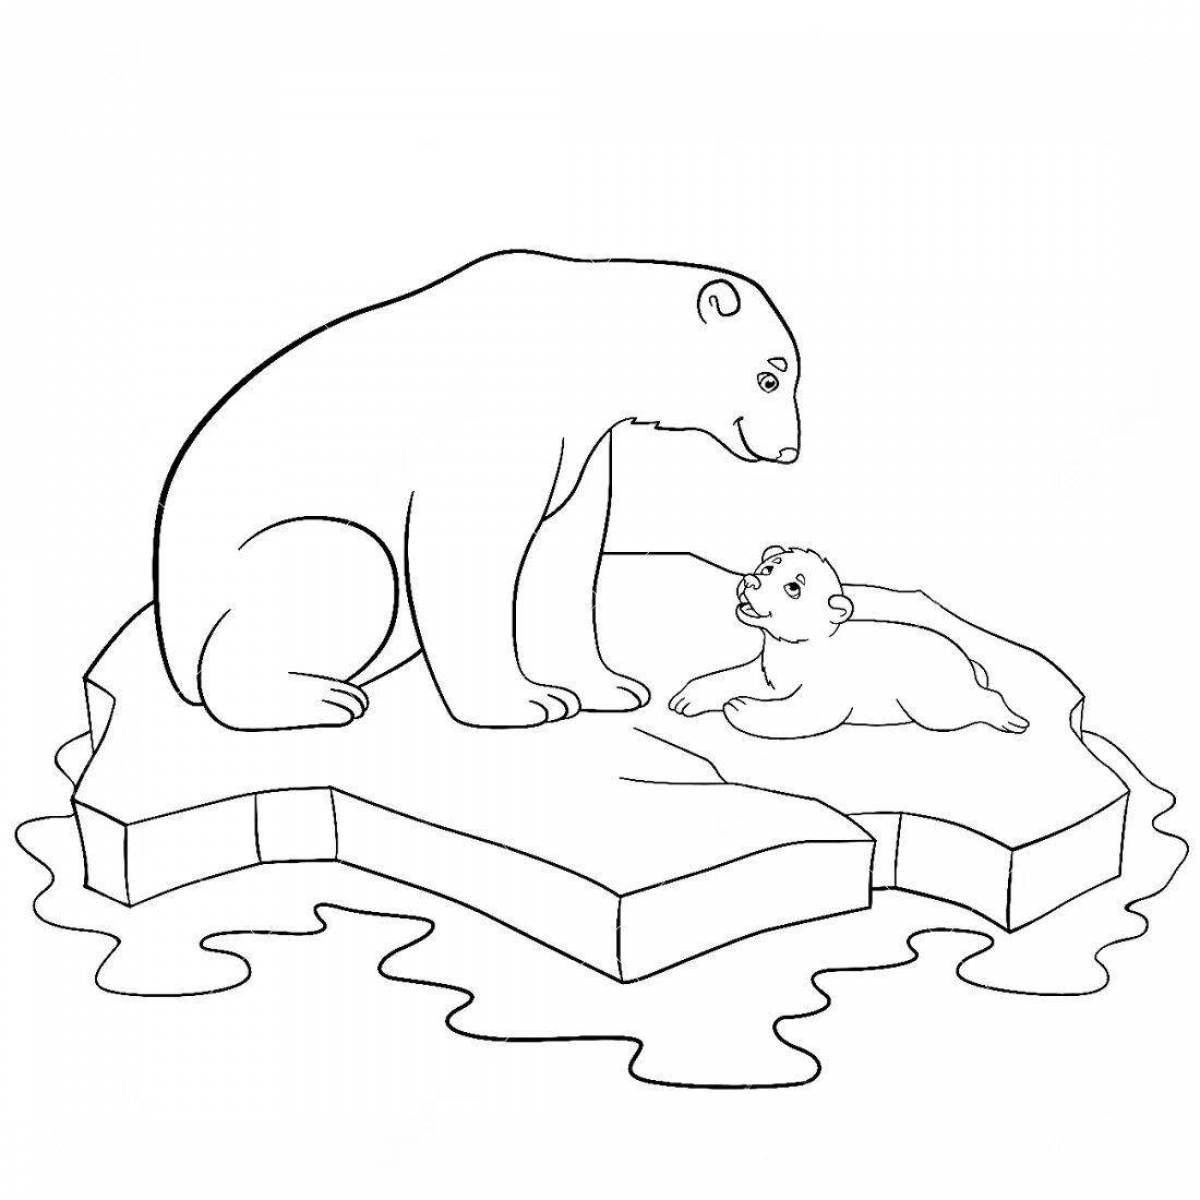 Coloring book umka and bear with colorful splashes